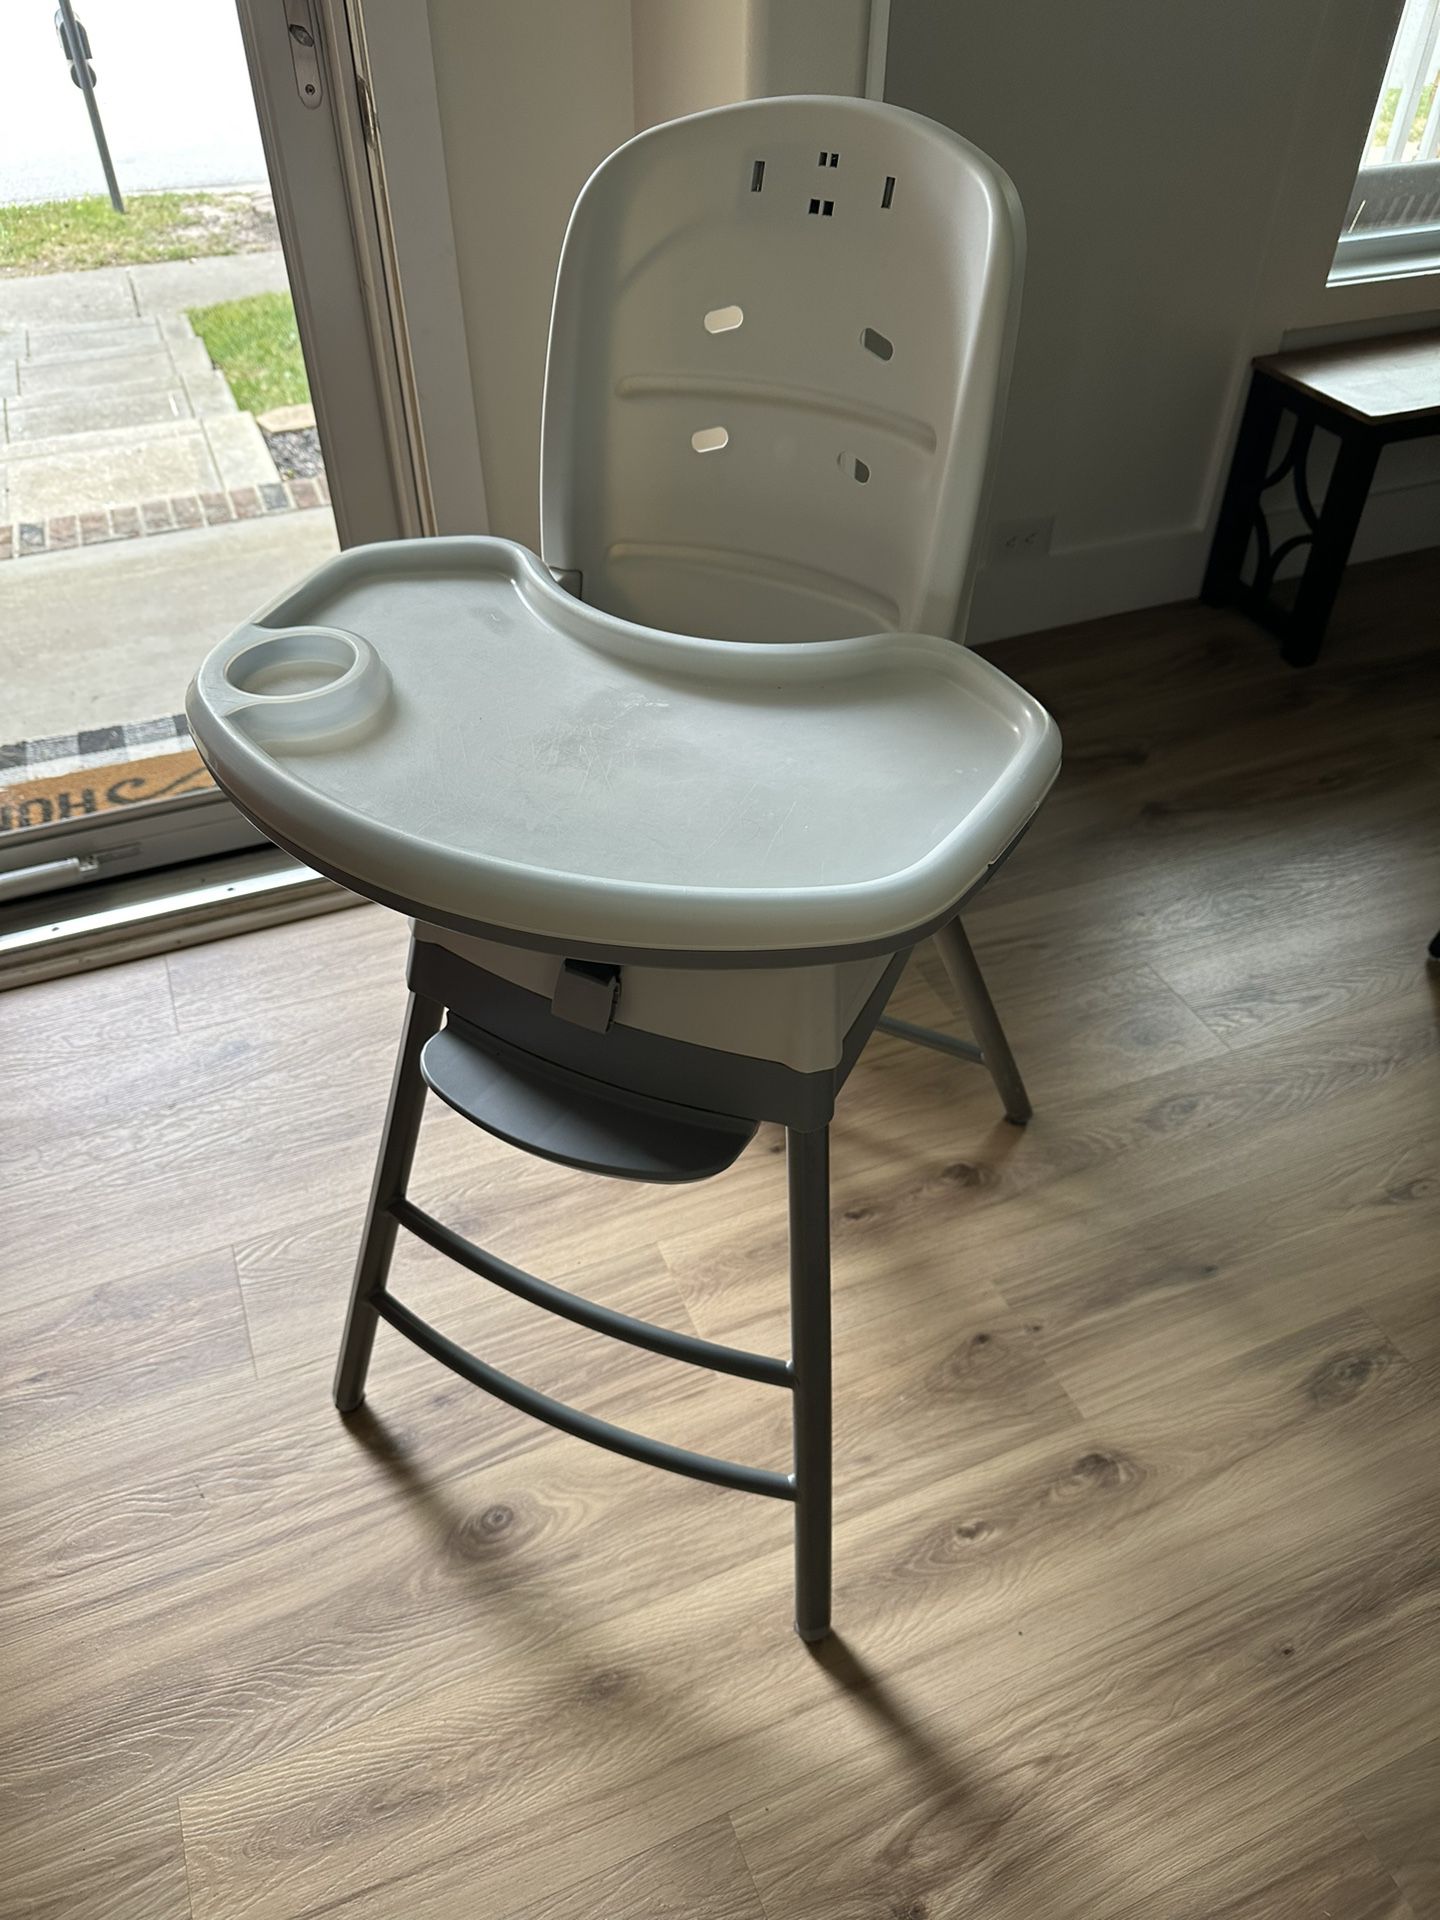 Graco High Chair / Booster Seat